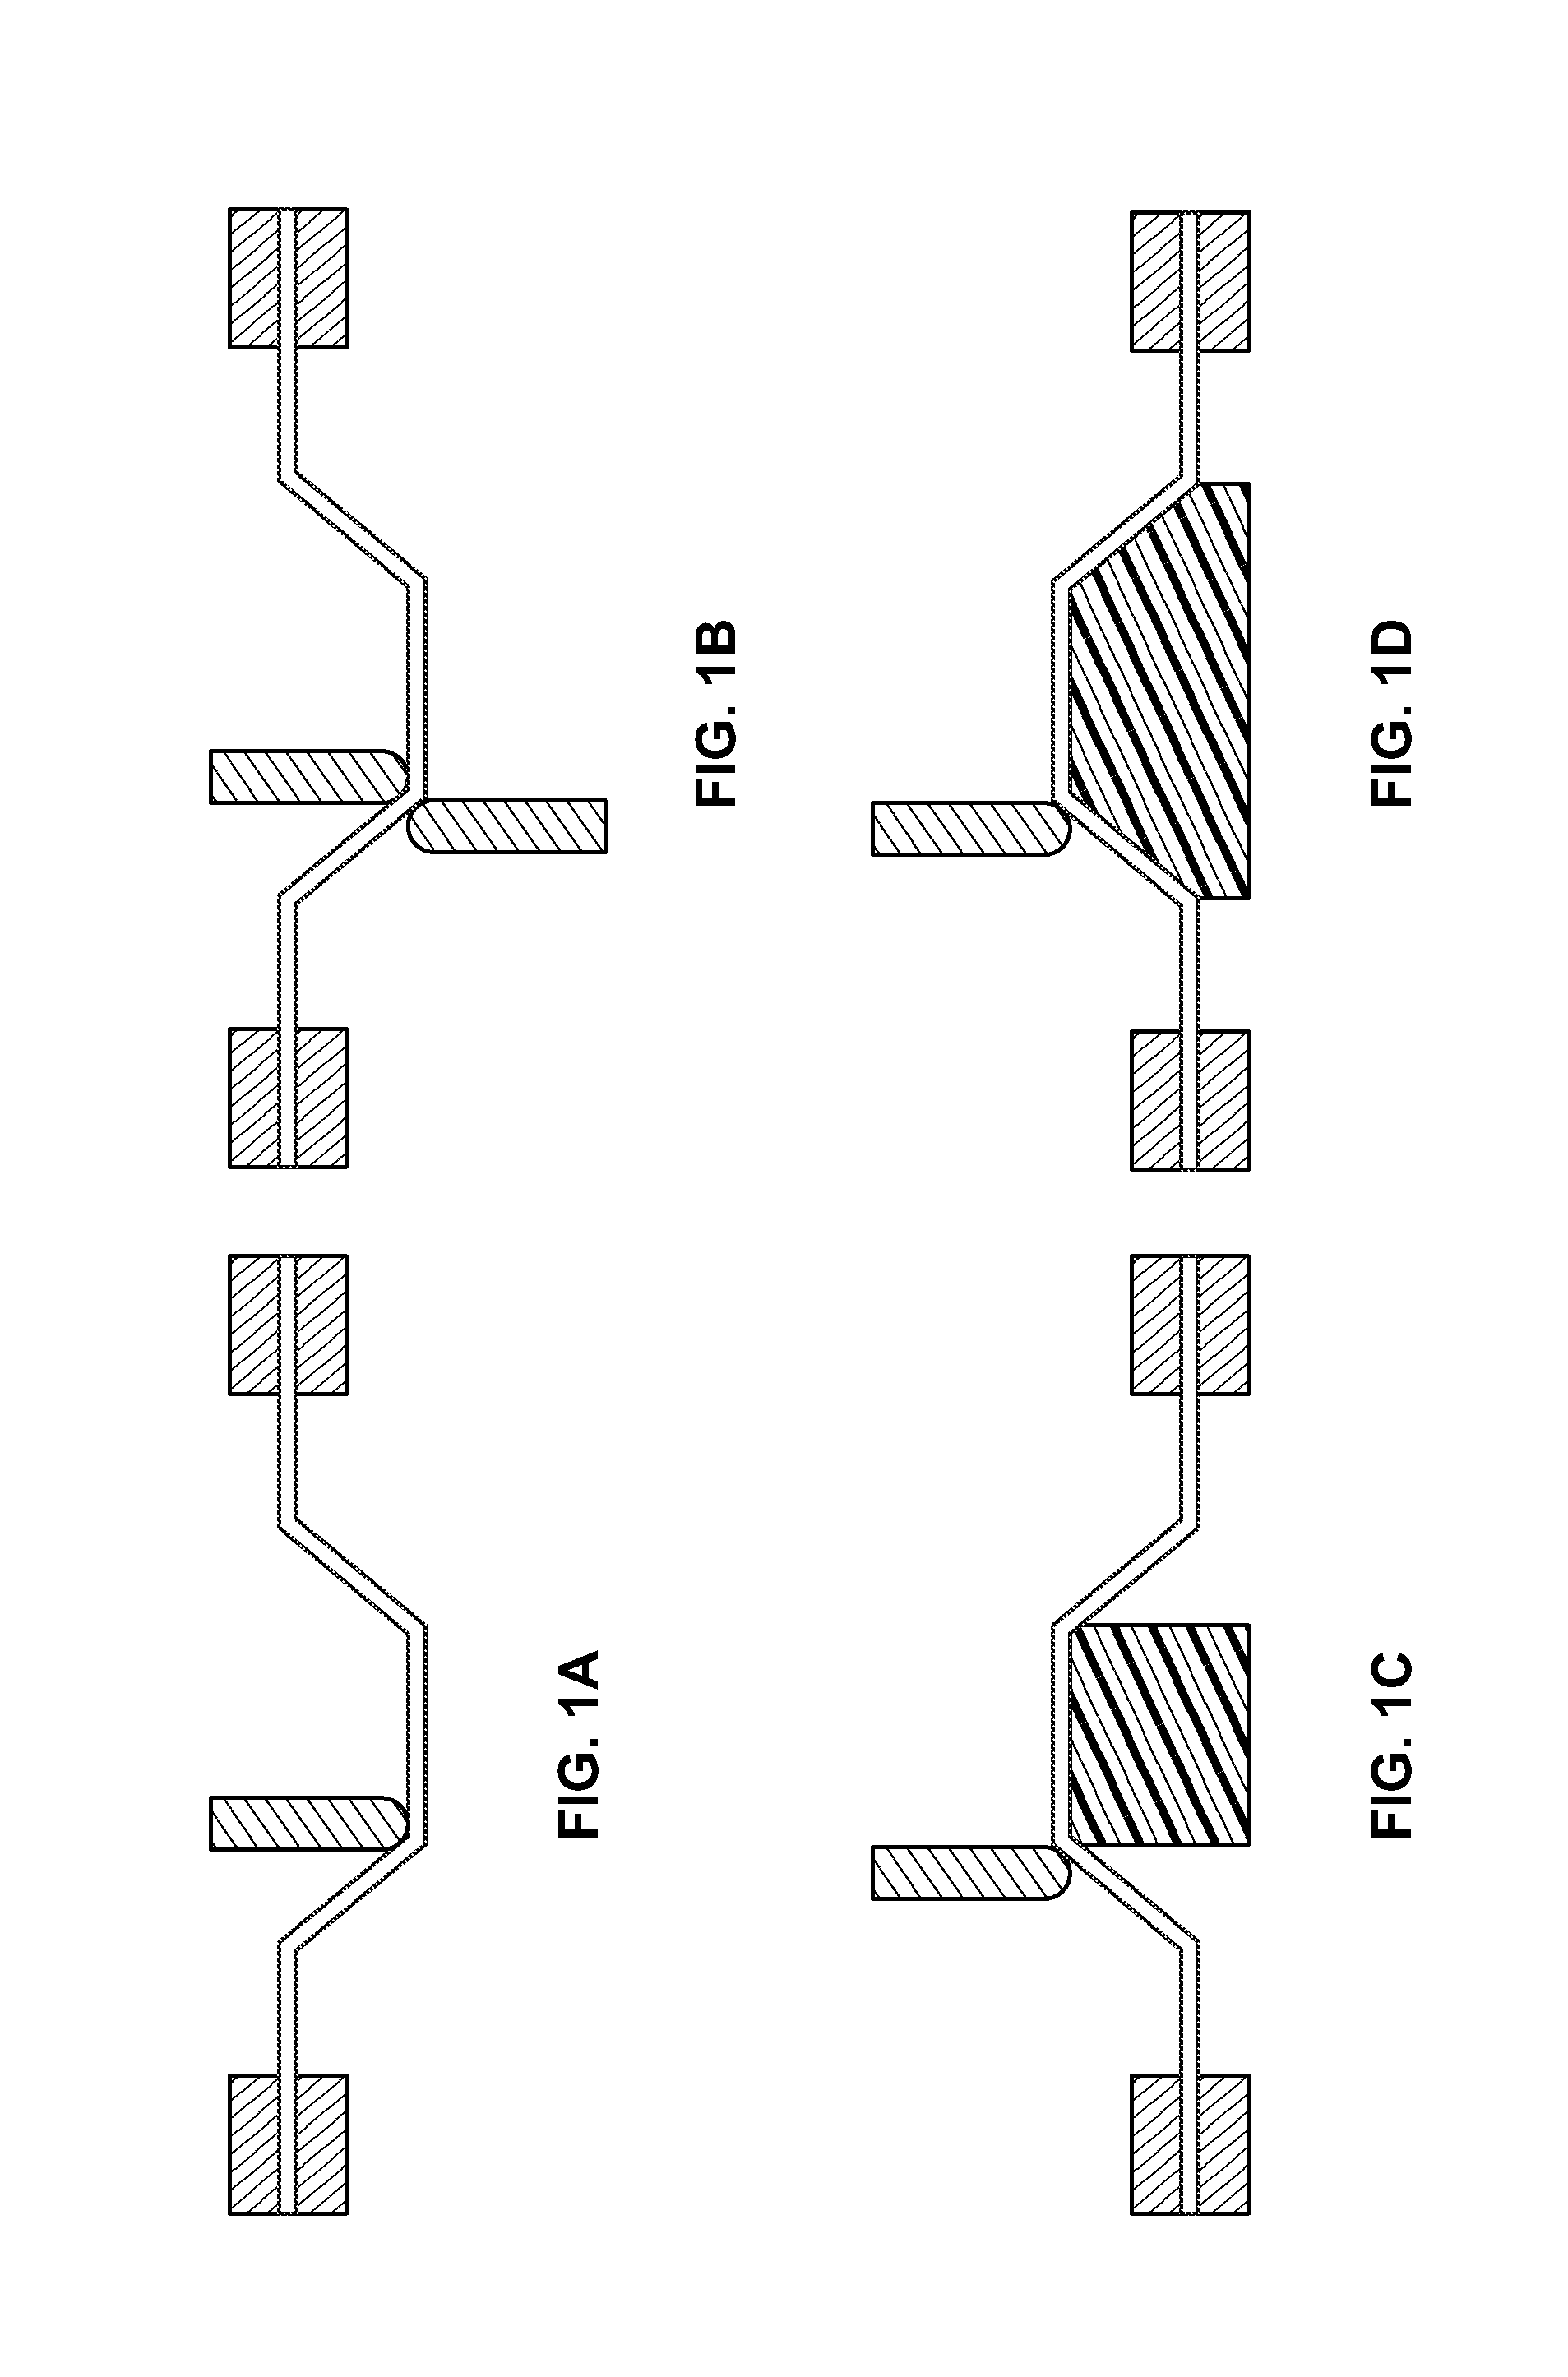 System and method for incremental forming